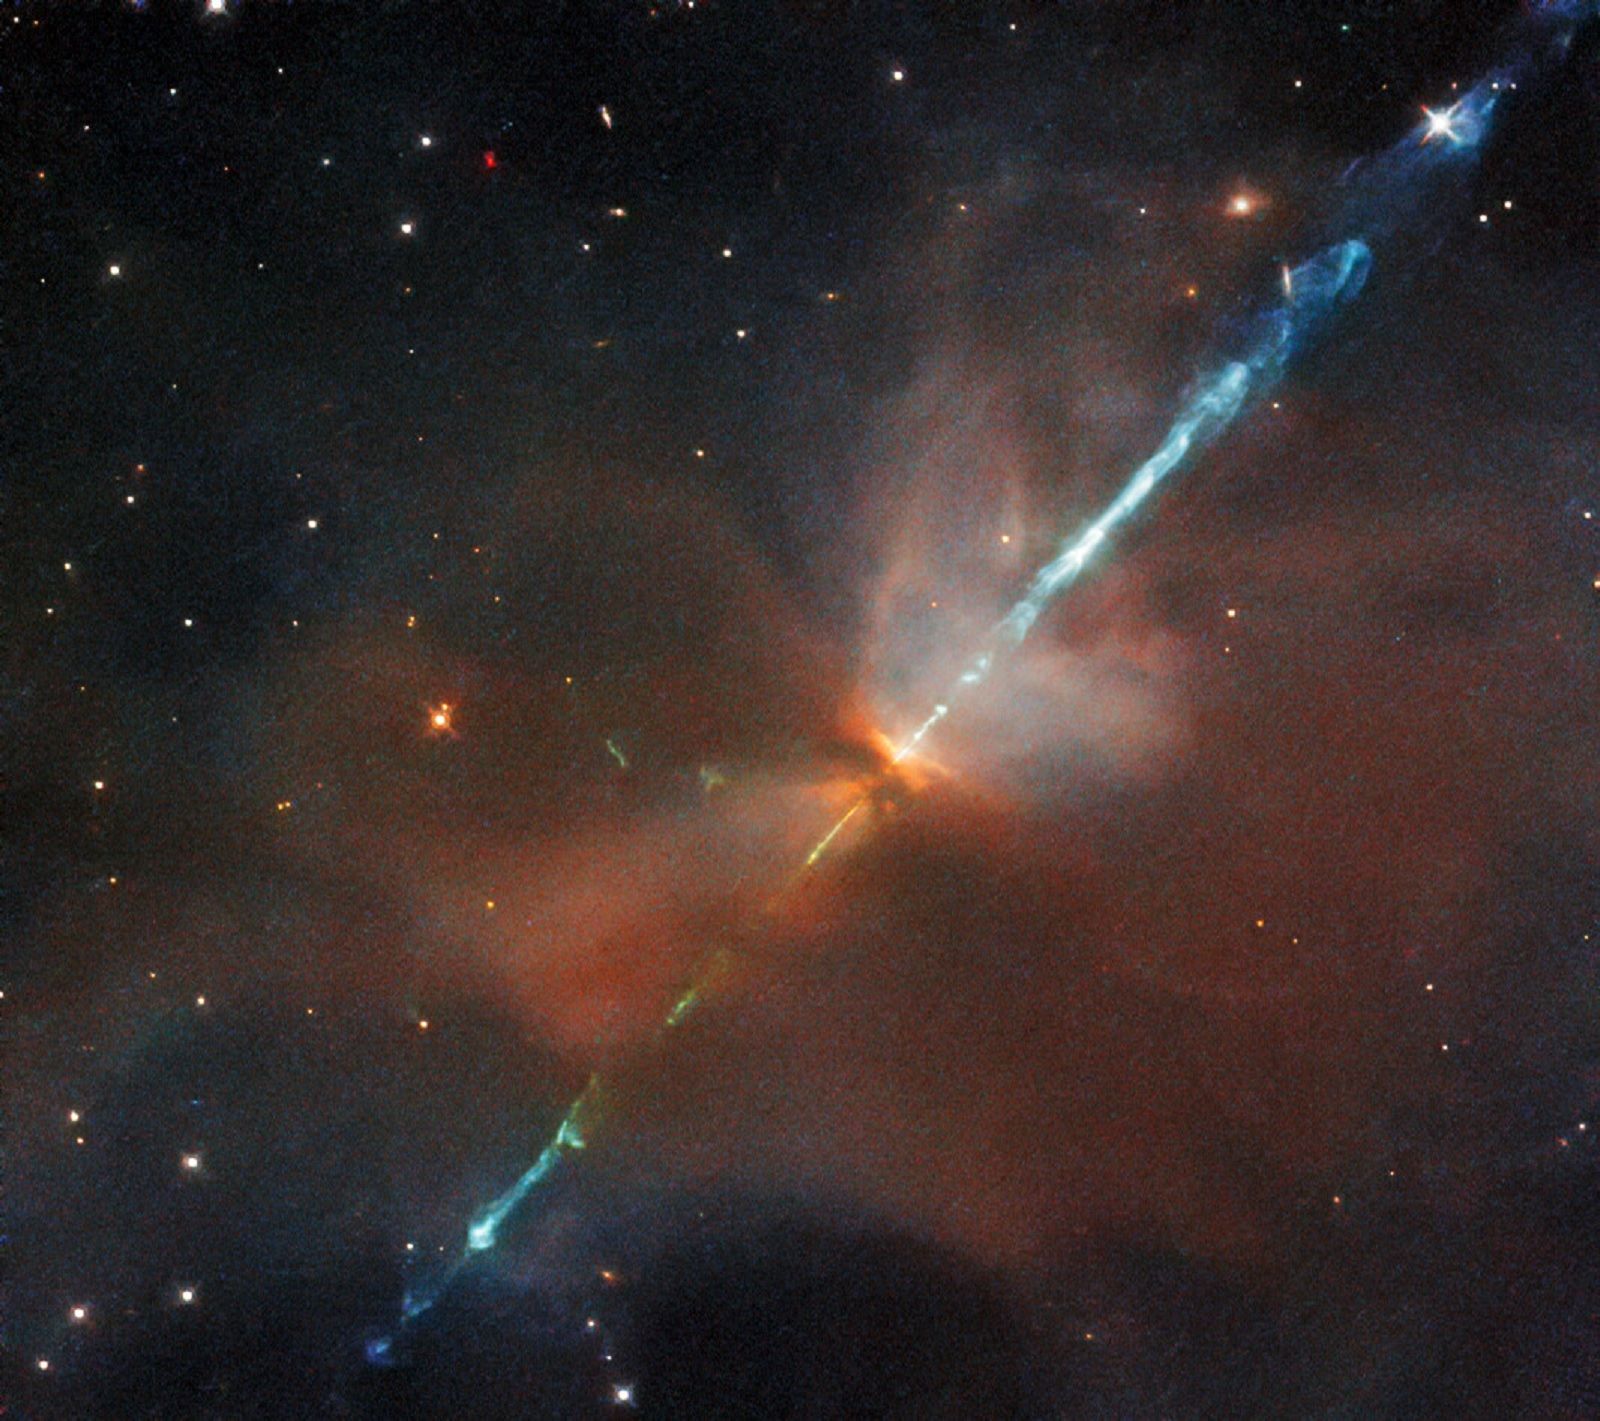 astounding images from the depths of the universe courtesy of the hubble space telescope photo 42